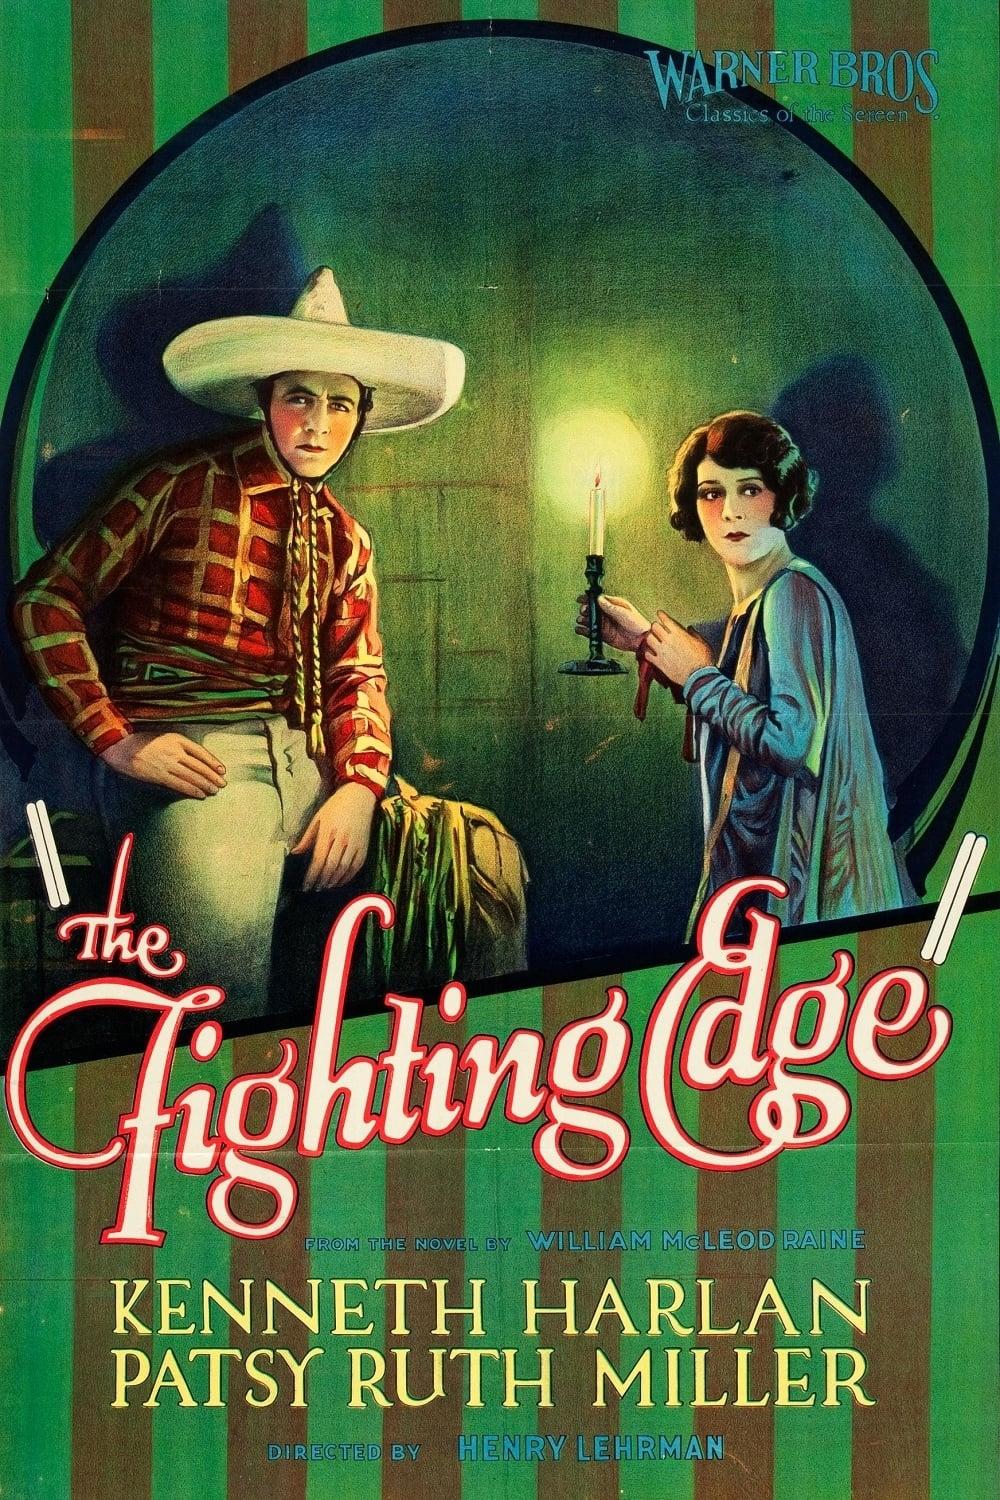 The Fighting Edge poster